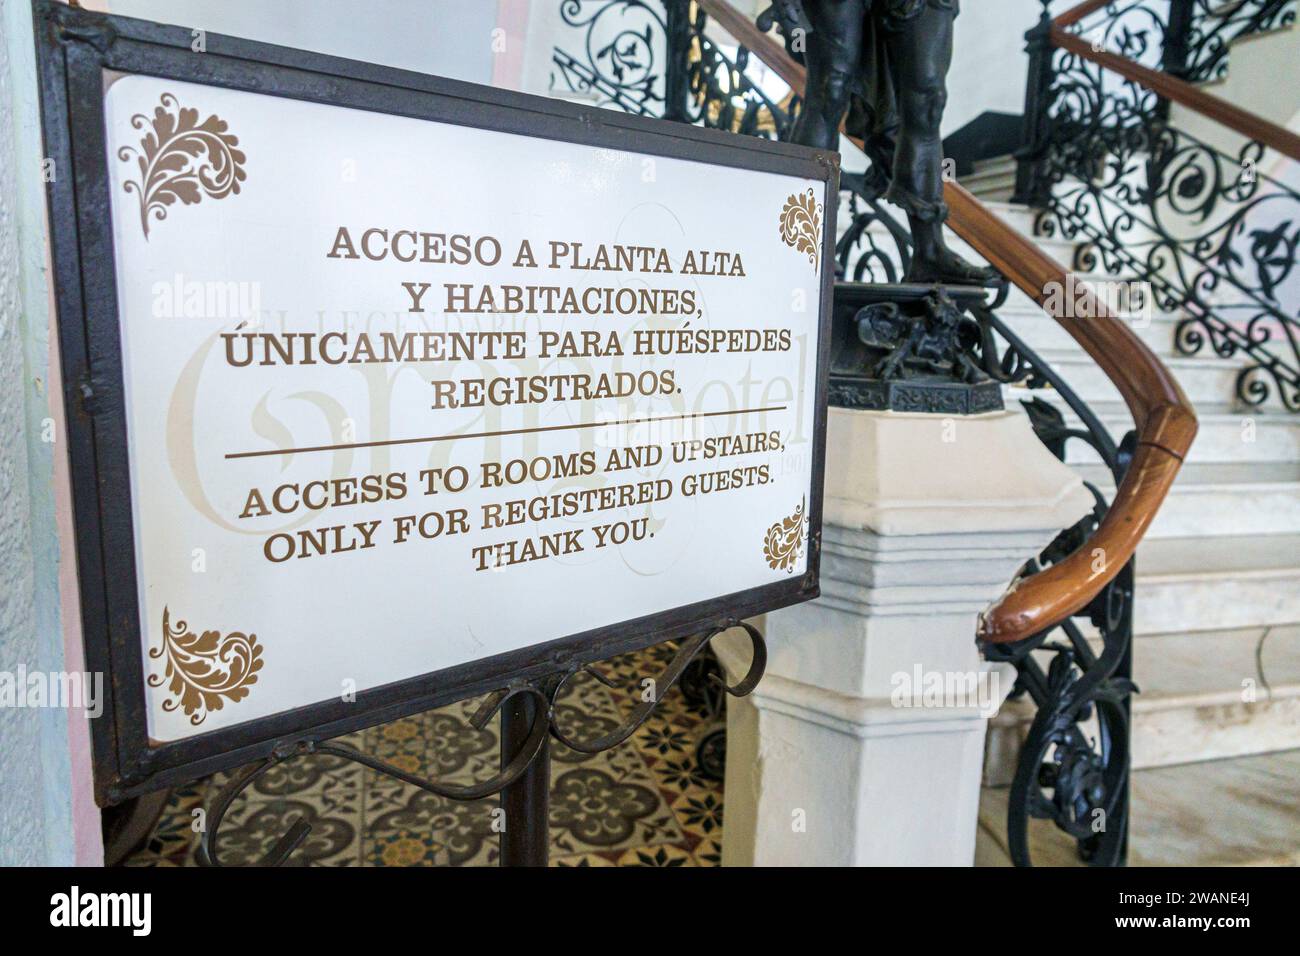 Merida Mexico,centro historico central historic district,Gran Hotel de Merida lobby,access rooms registered guests only,inside interior indoors,hotel Stock Photo